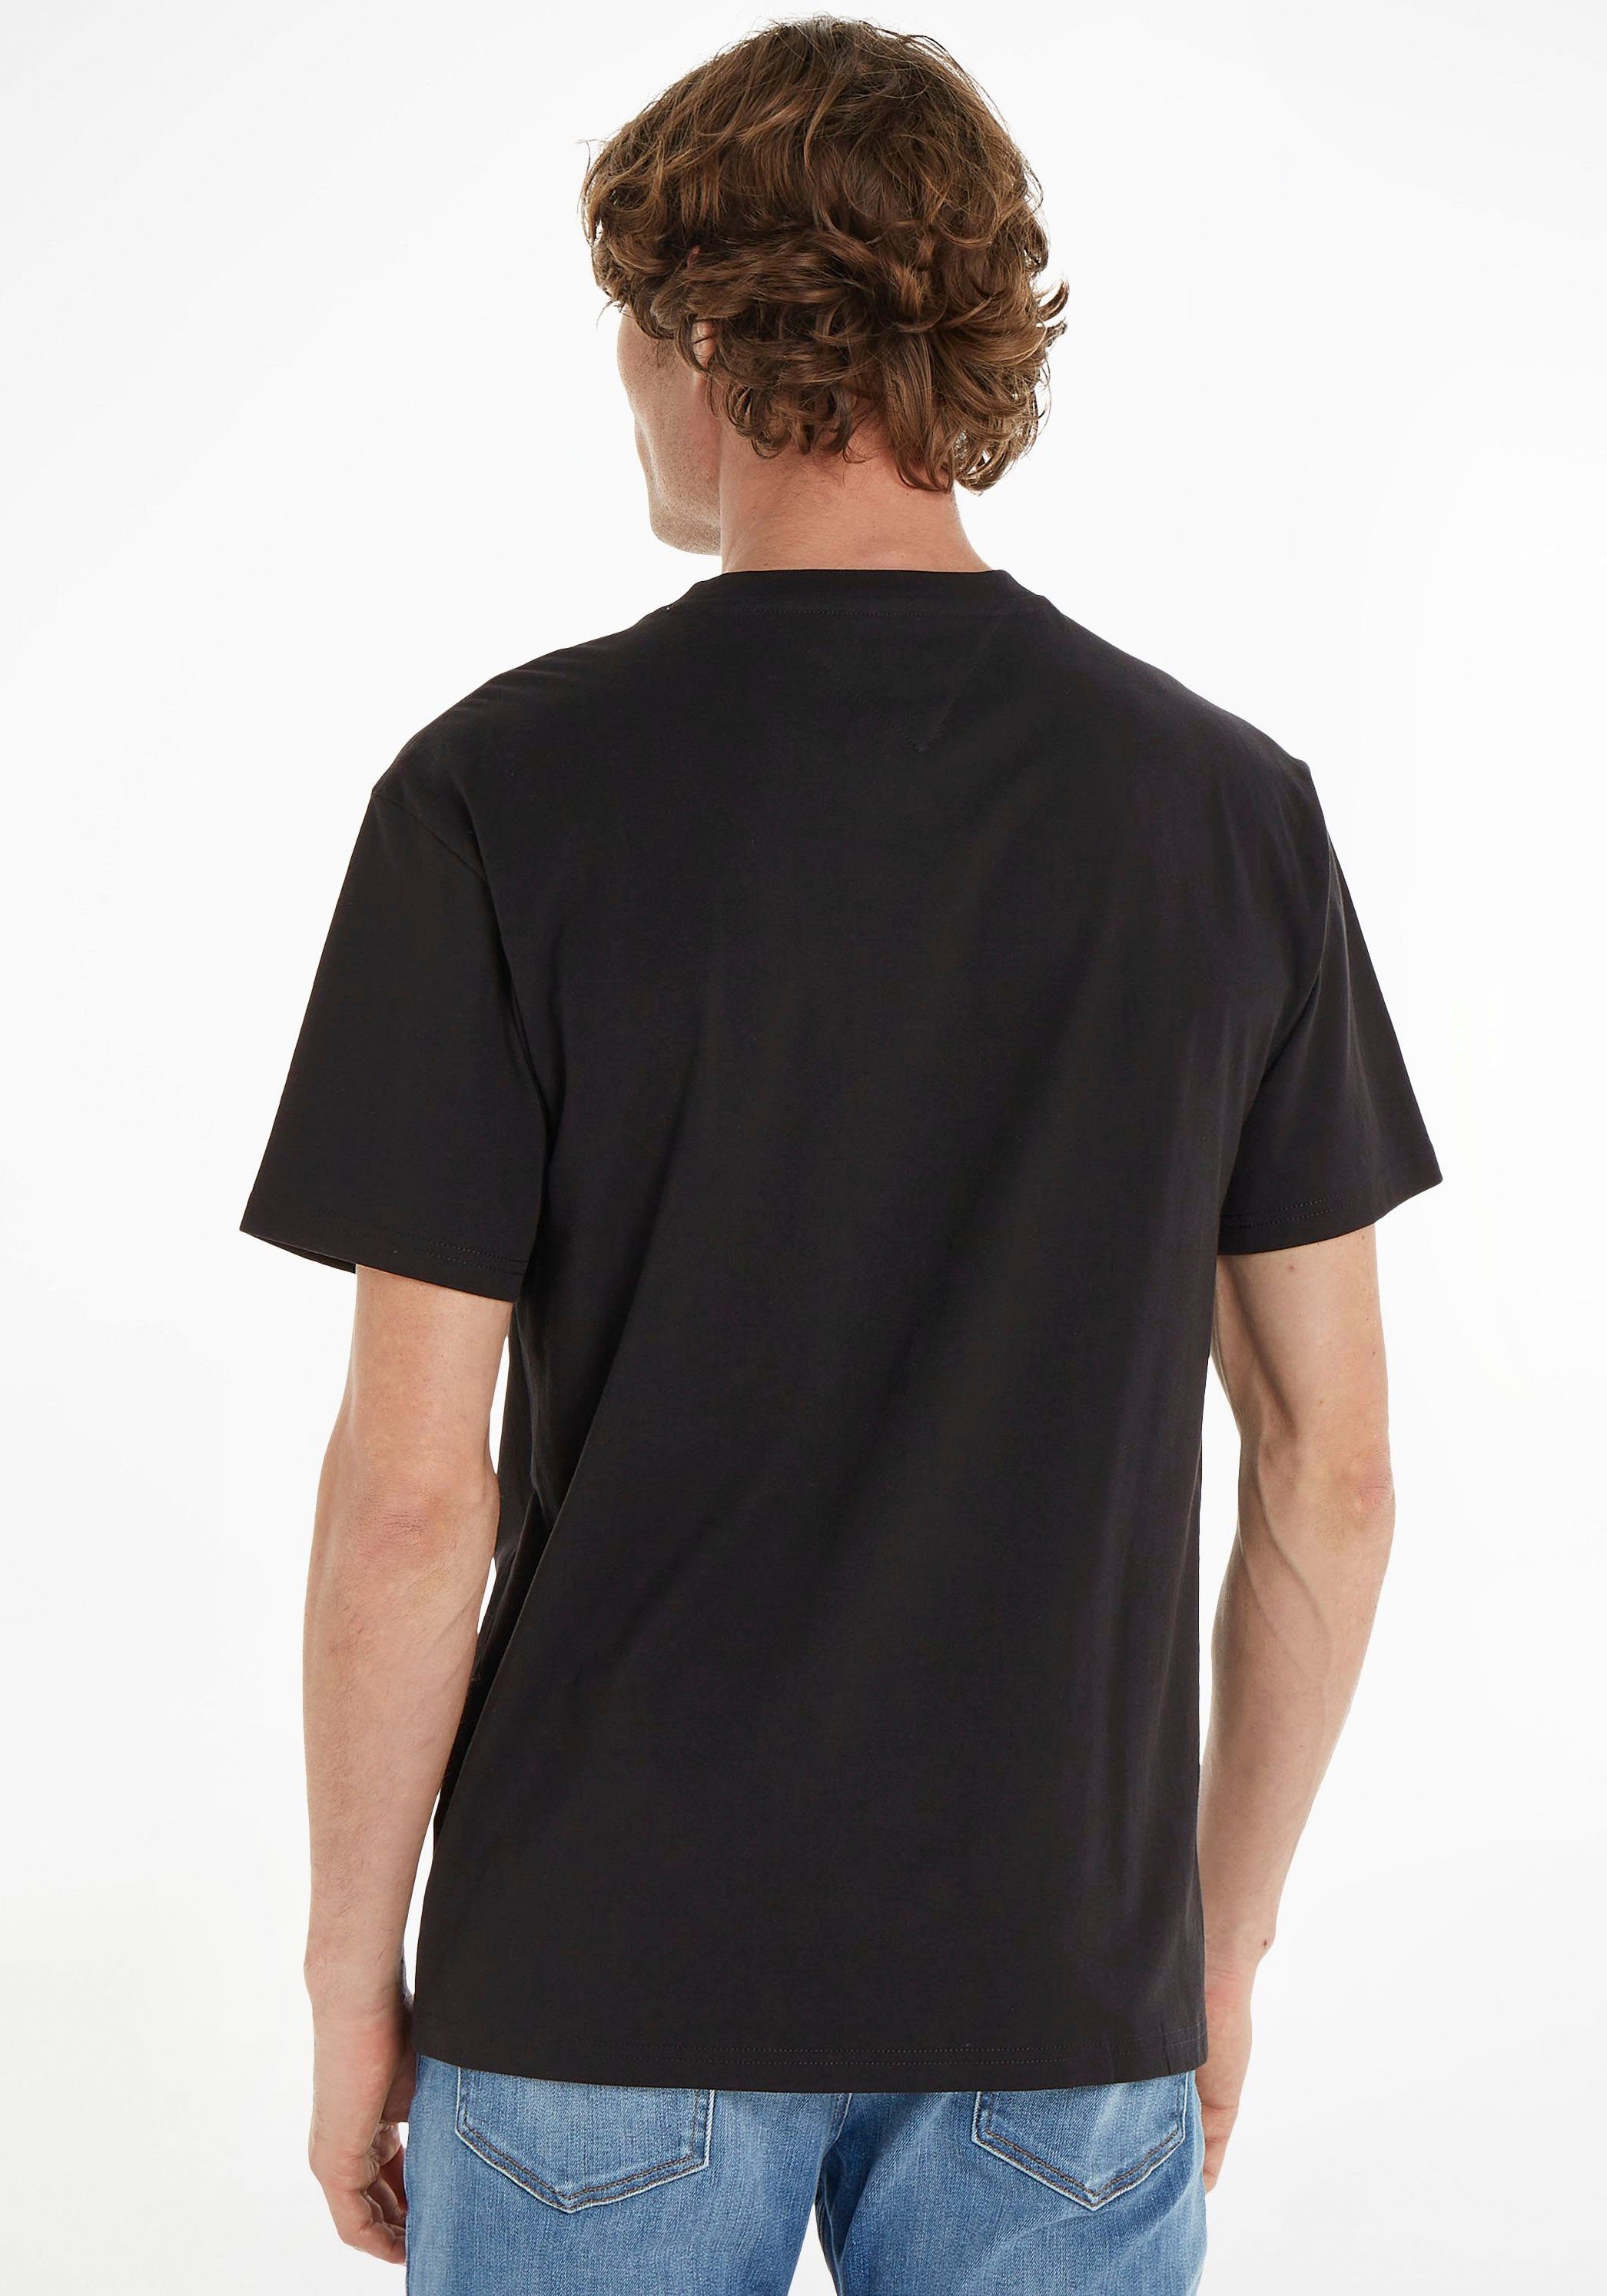 CHEST LINEAR Tommy CLSC T-Shirt Black TJM Jeans TEE